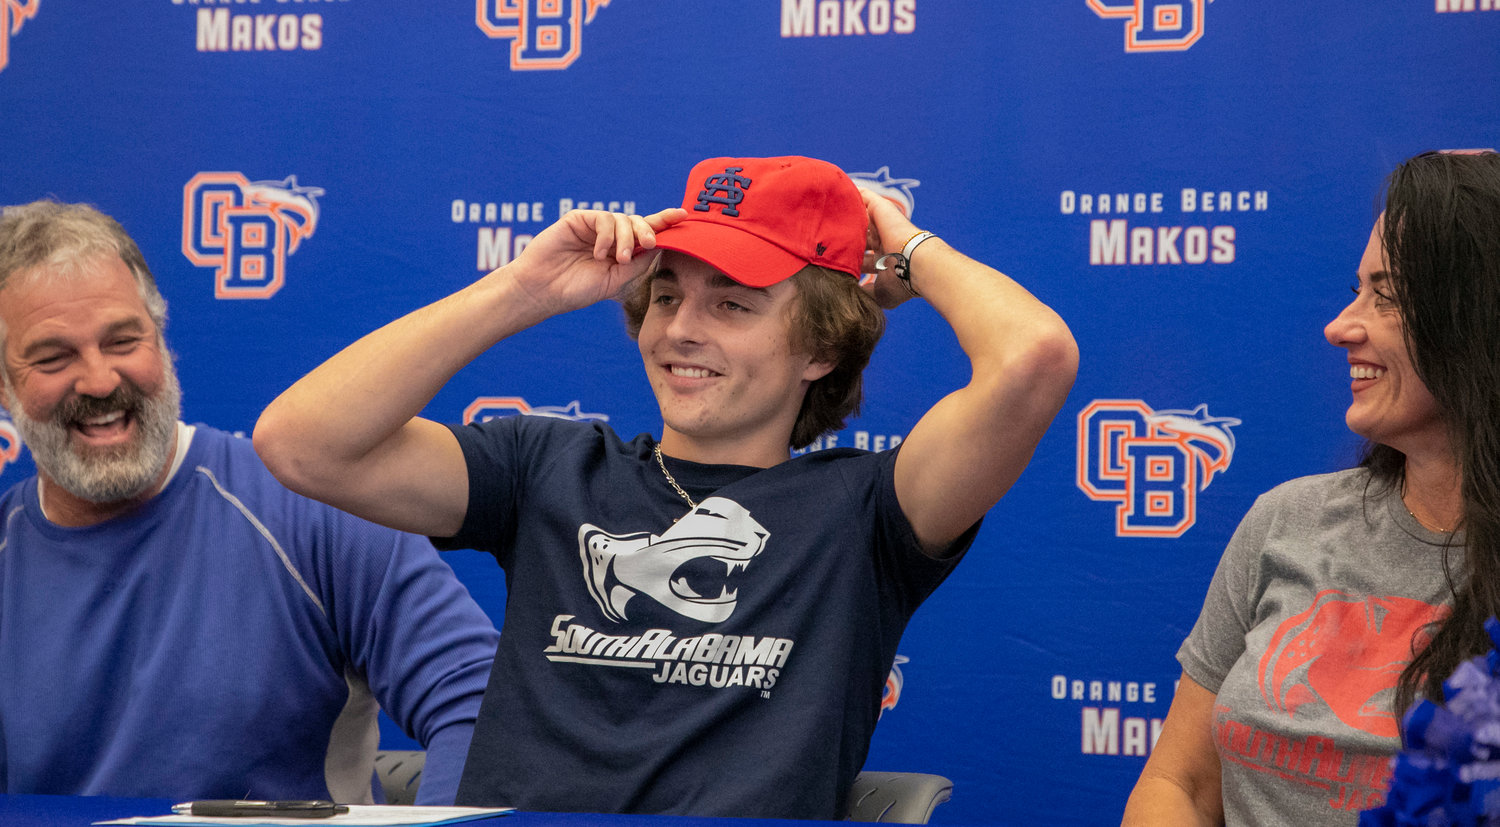 Cash Turner dons his new colors by putting on his South Alabama cap after he signed with the Jaguars as part of National Signing Day Wednesday, Feb. 1, at Orange Beach High School. The Mako quarterback joined teammate Chris Pearson in being the first from Orange Beach to sign with college football teams.